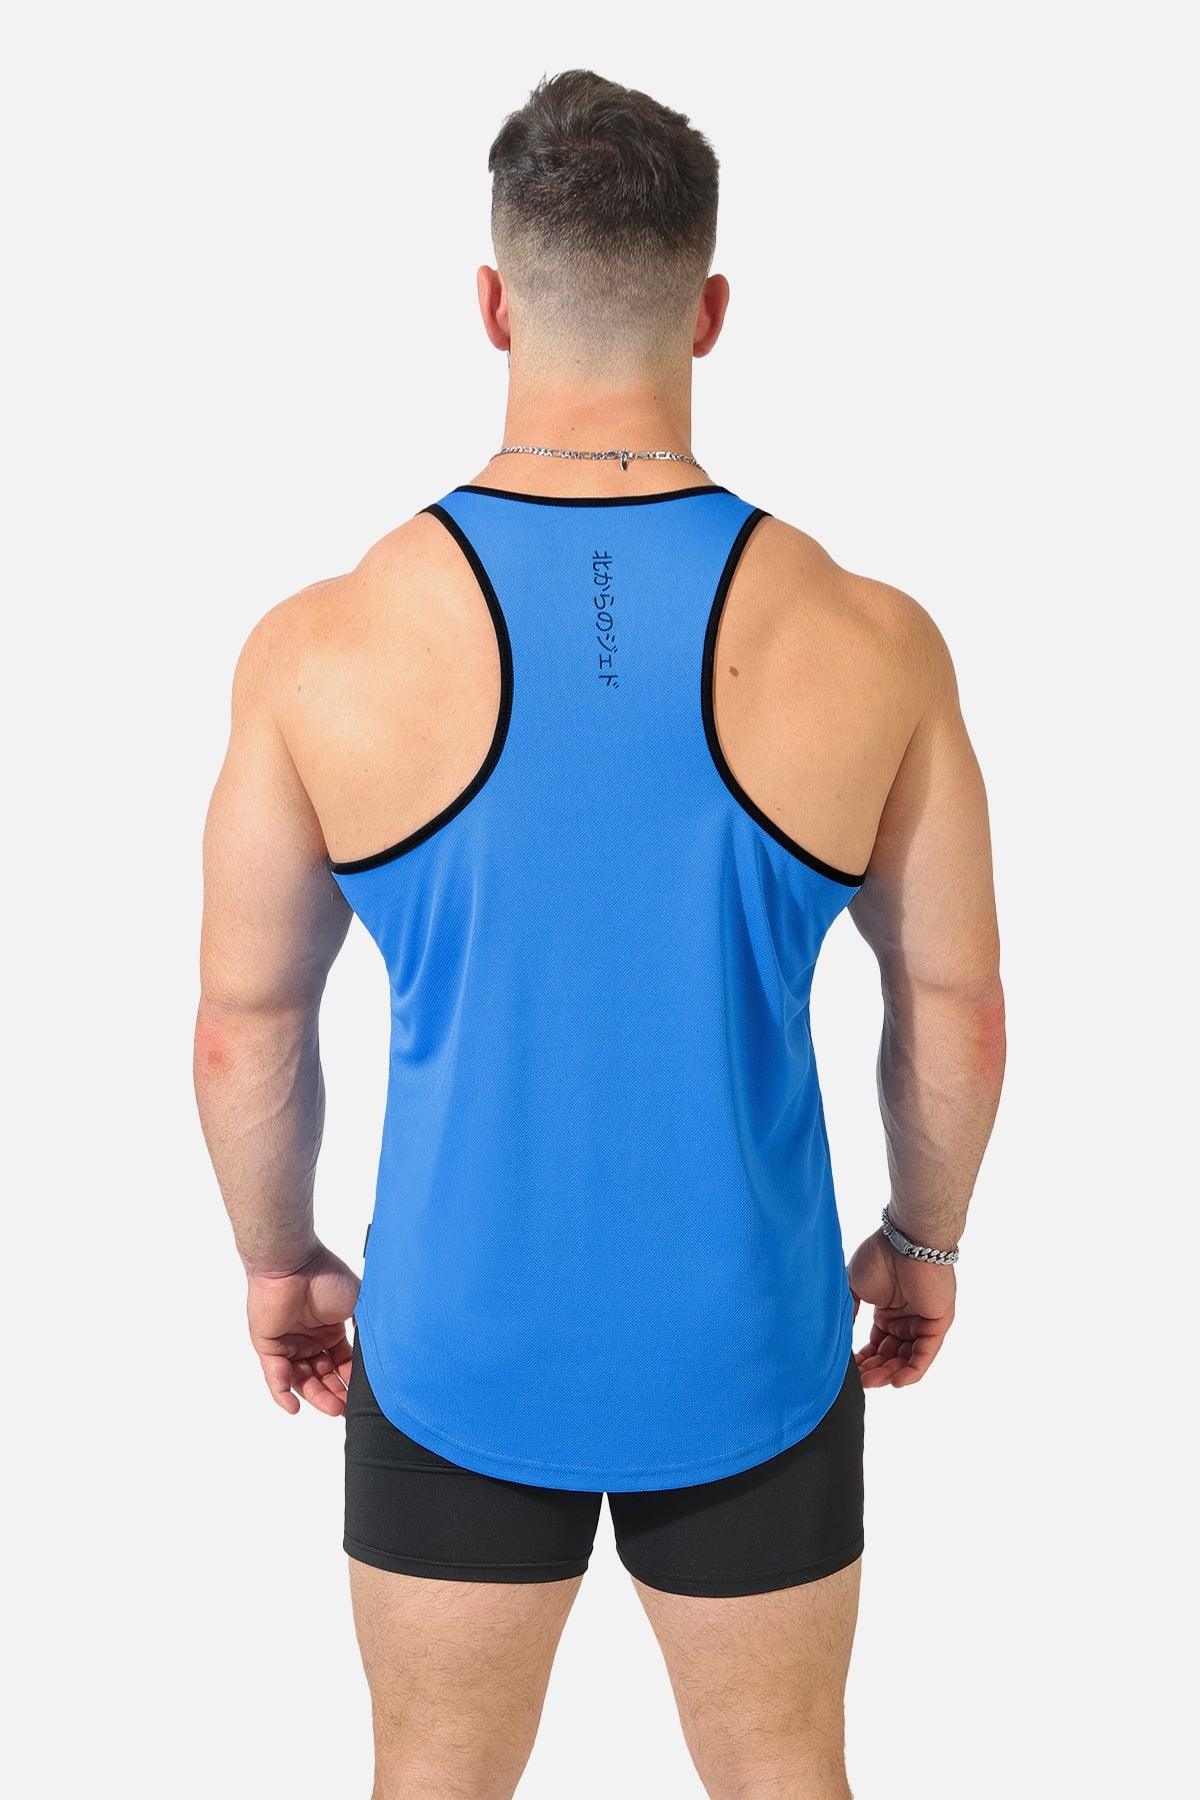 Utility Fast-Dry Workout Stringer - Blue & Black - Jed North Canada